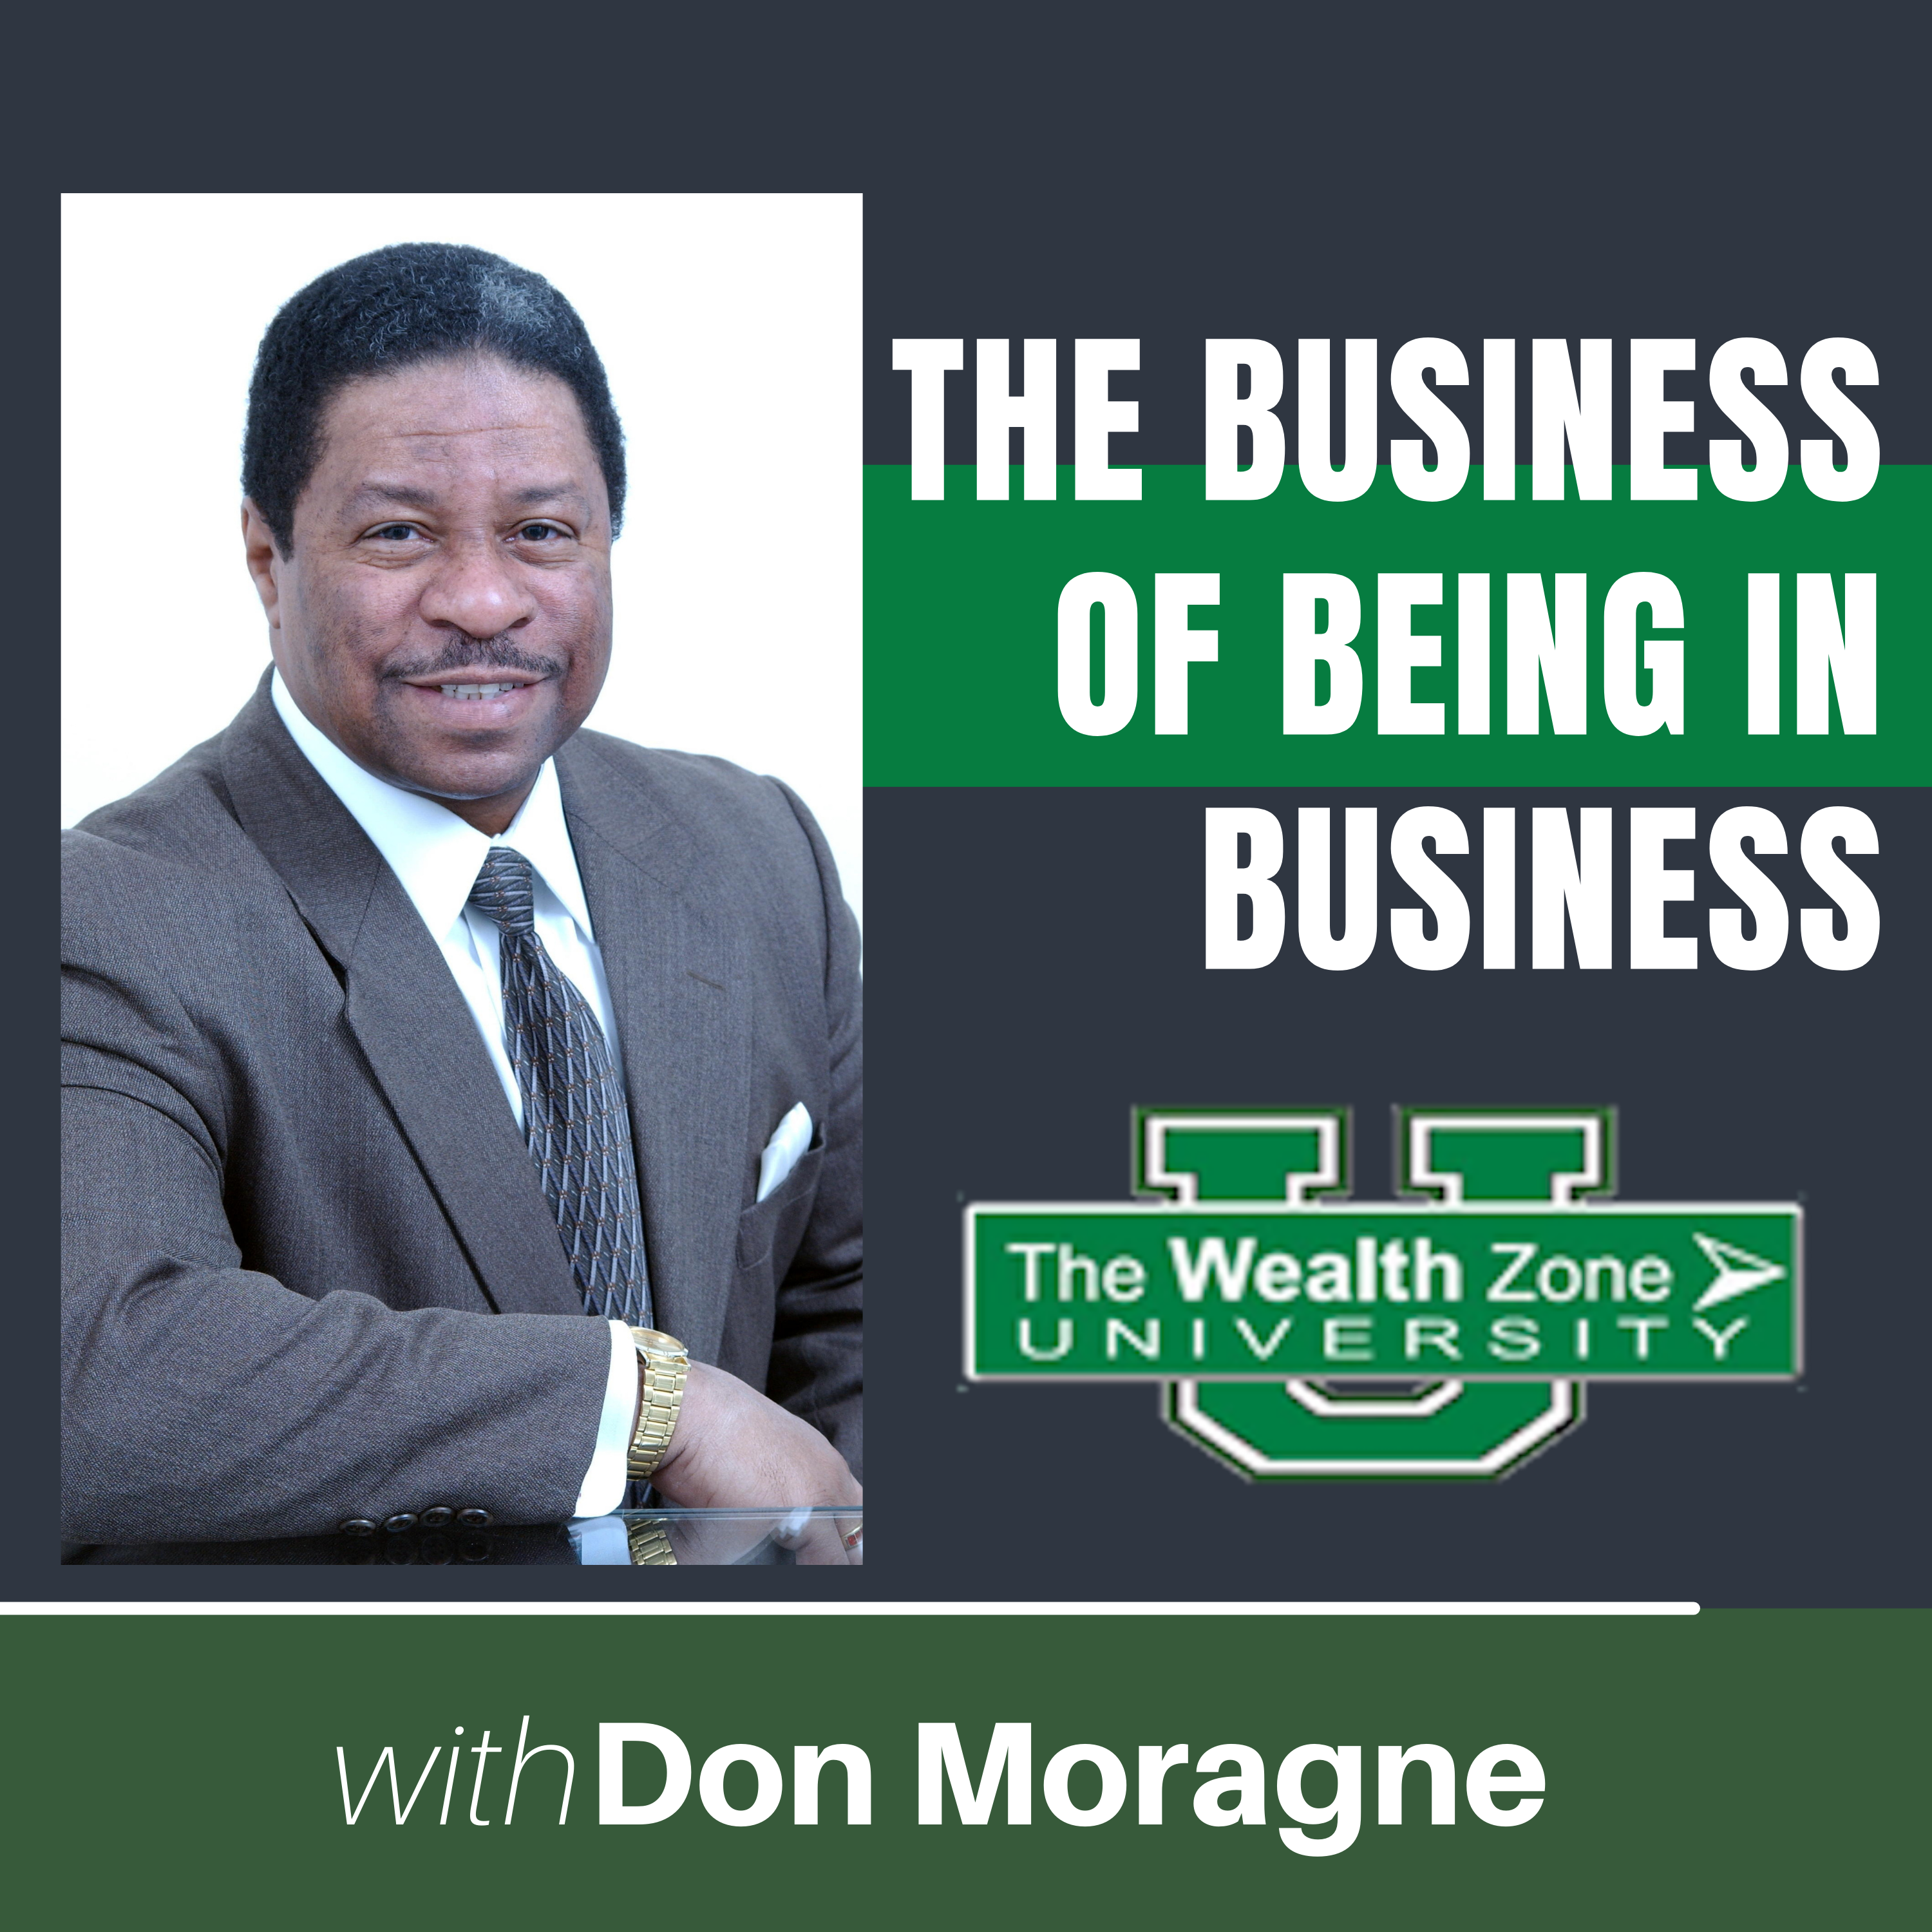 Business Financial Management with The Wealth Zone University